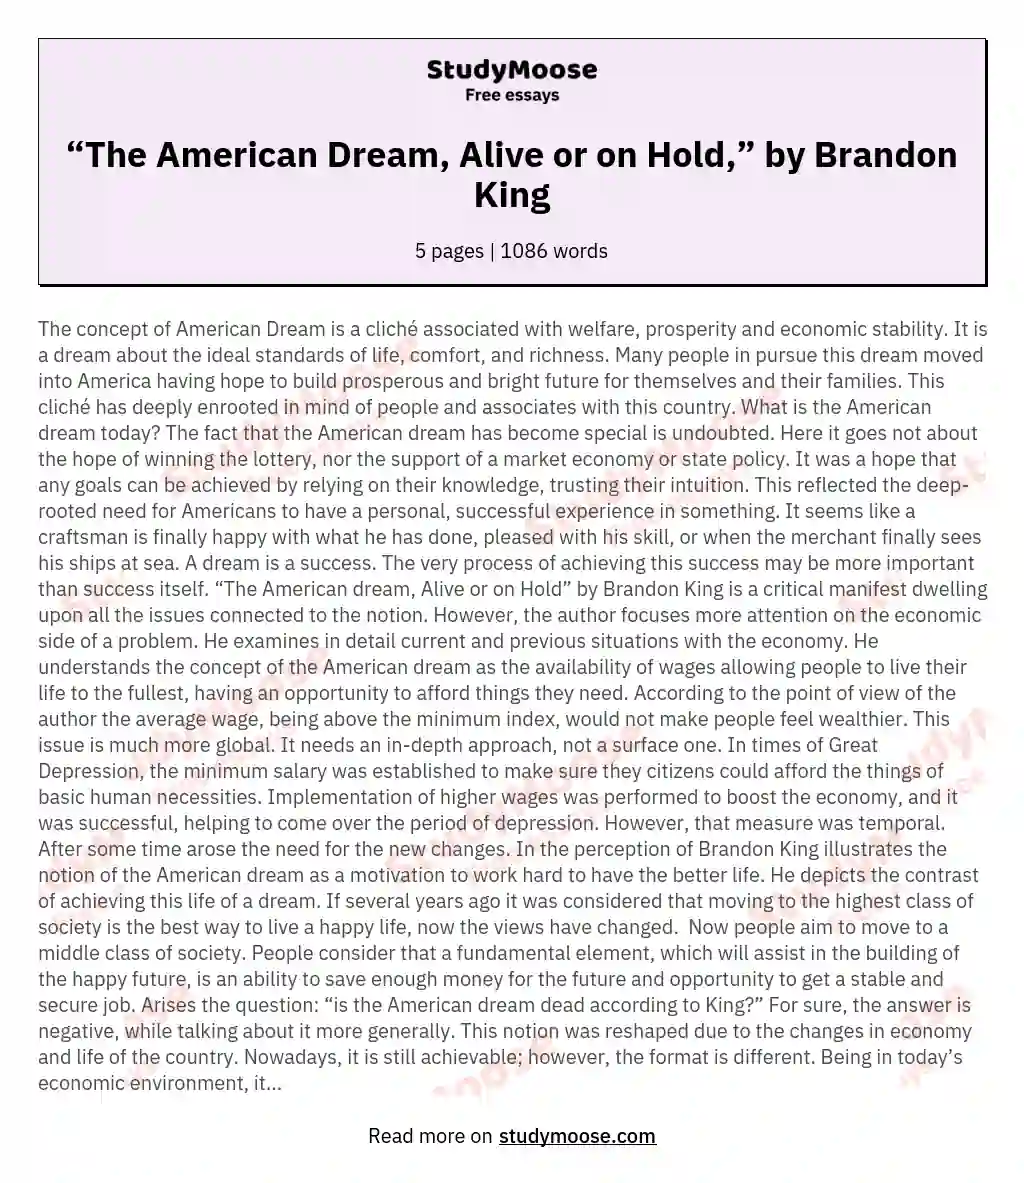 “The American Dream, Alive or on Hold,” by Brandon King essay